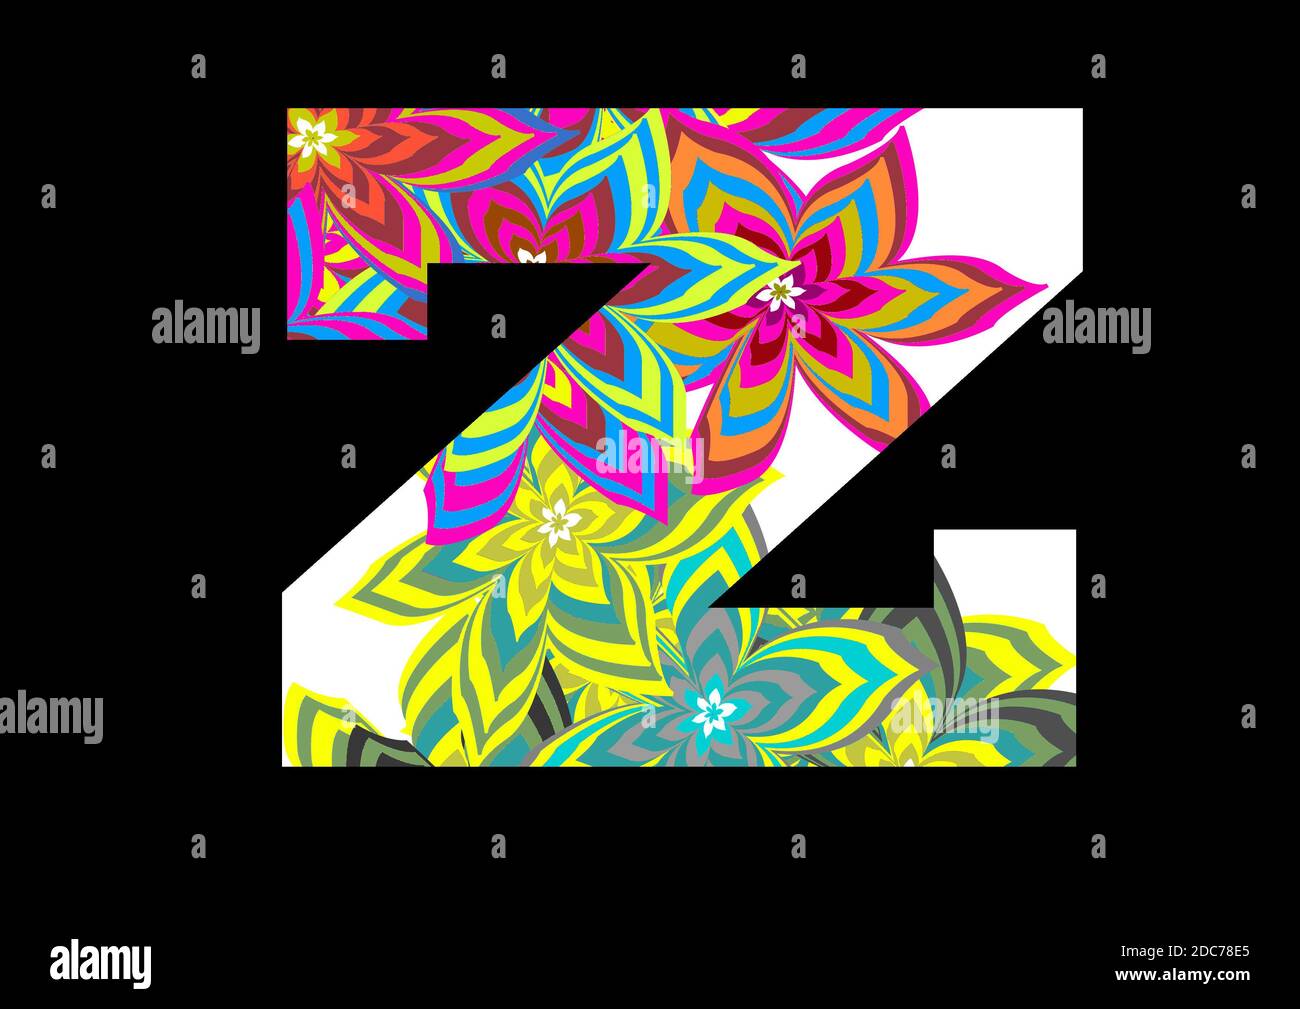 Alphabet z made of fun colorful flower pattern for decoration Stock Photo